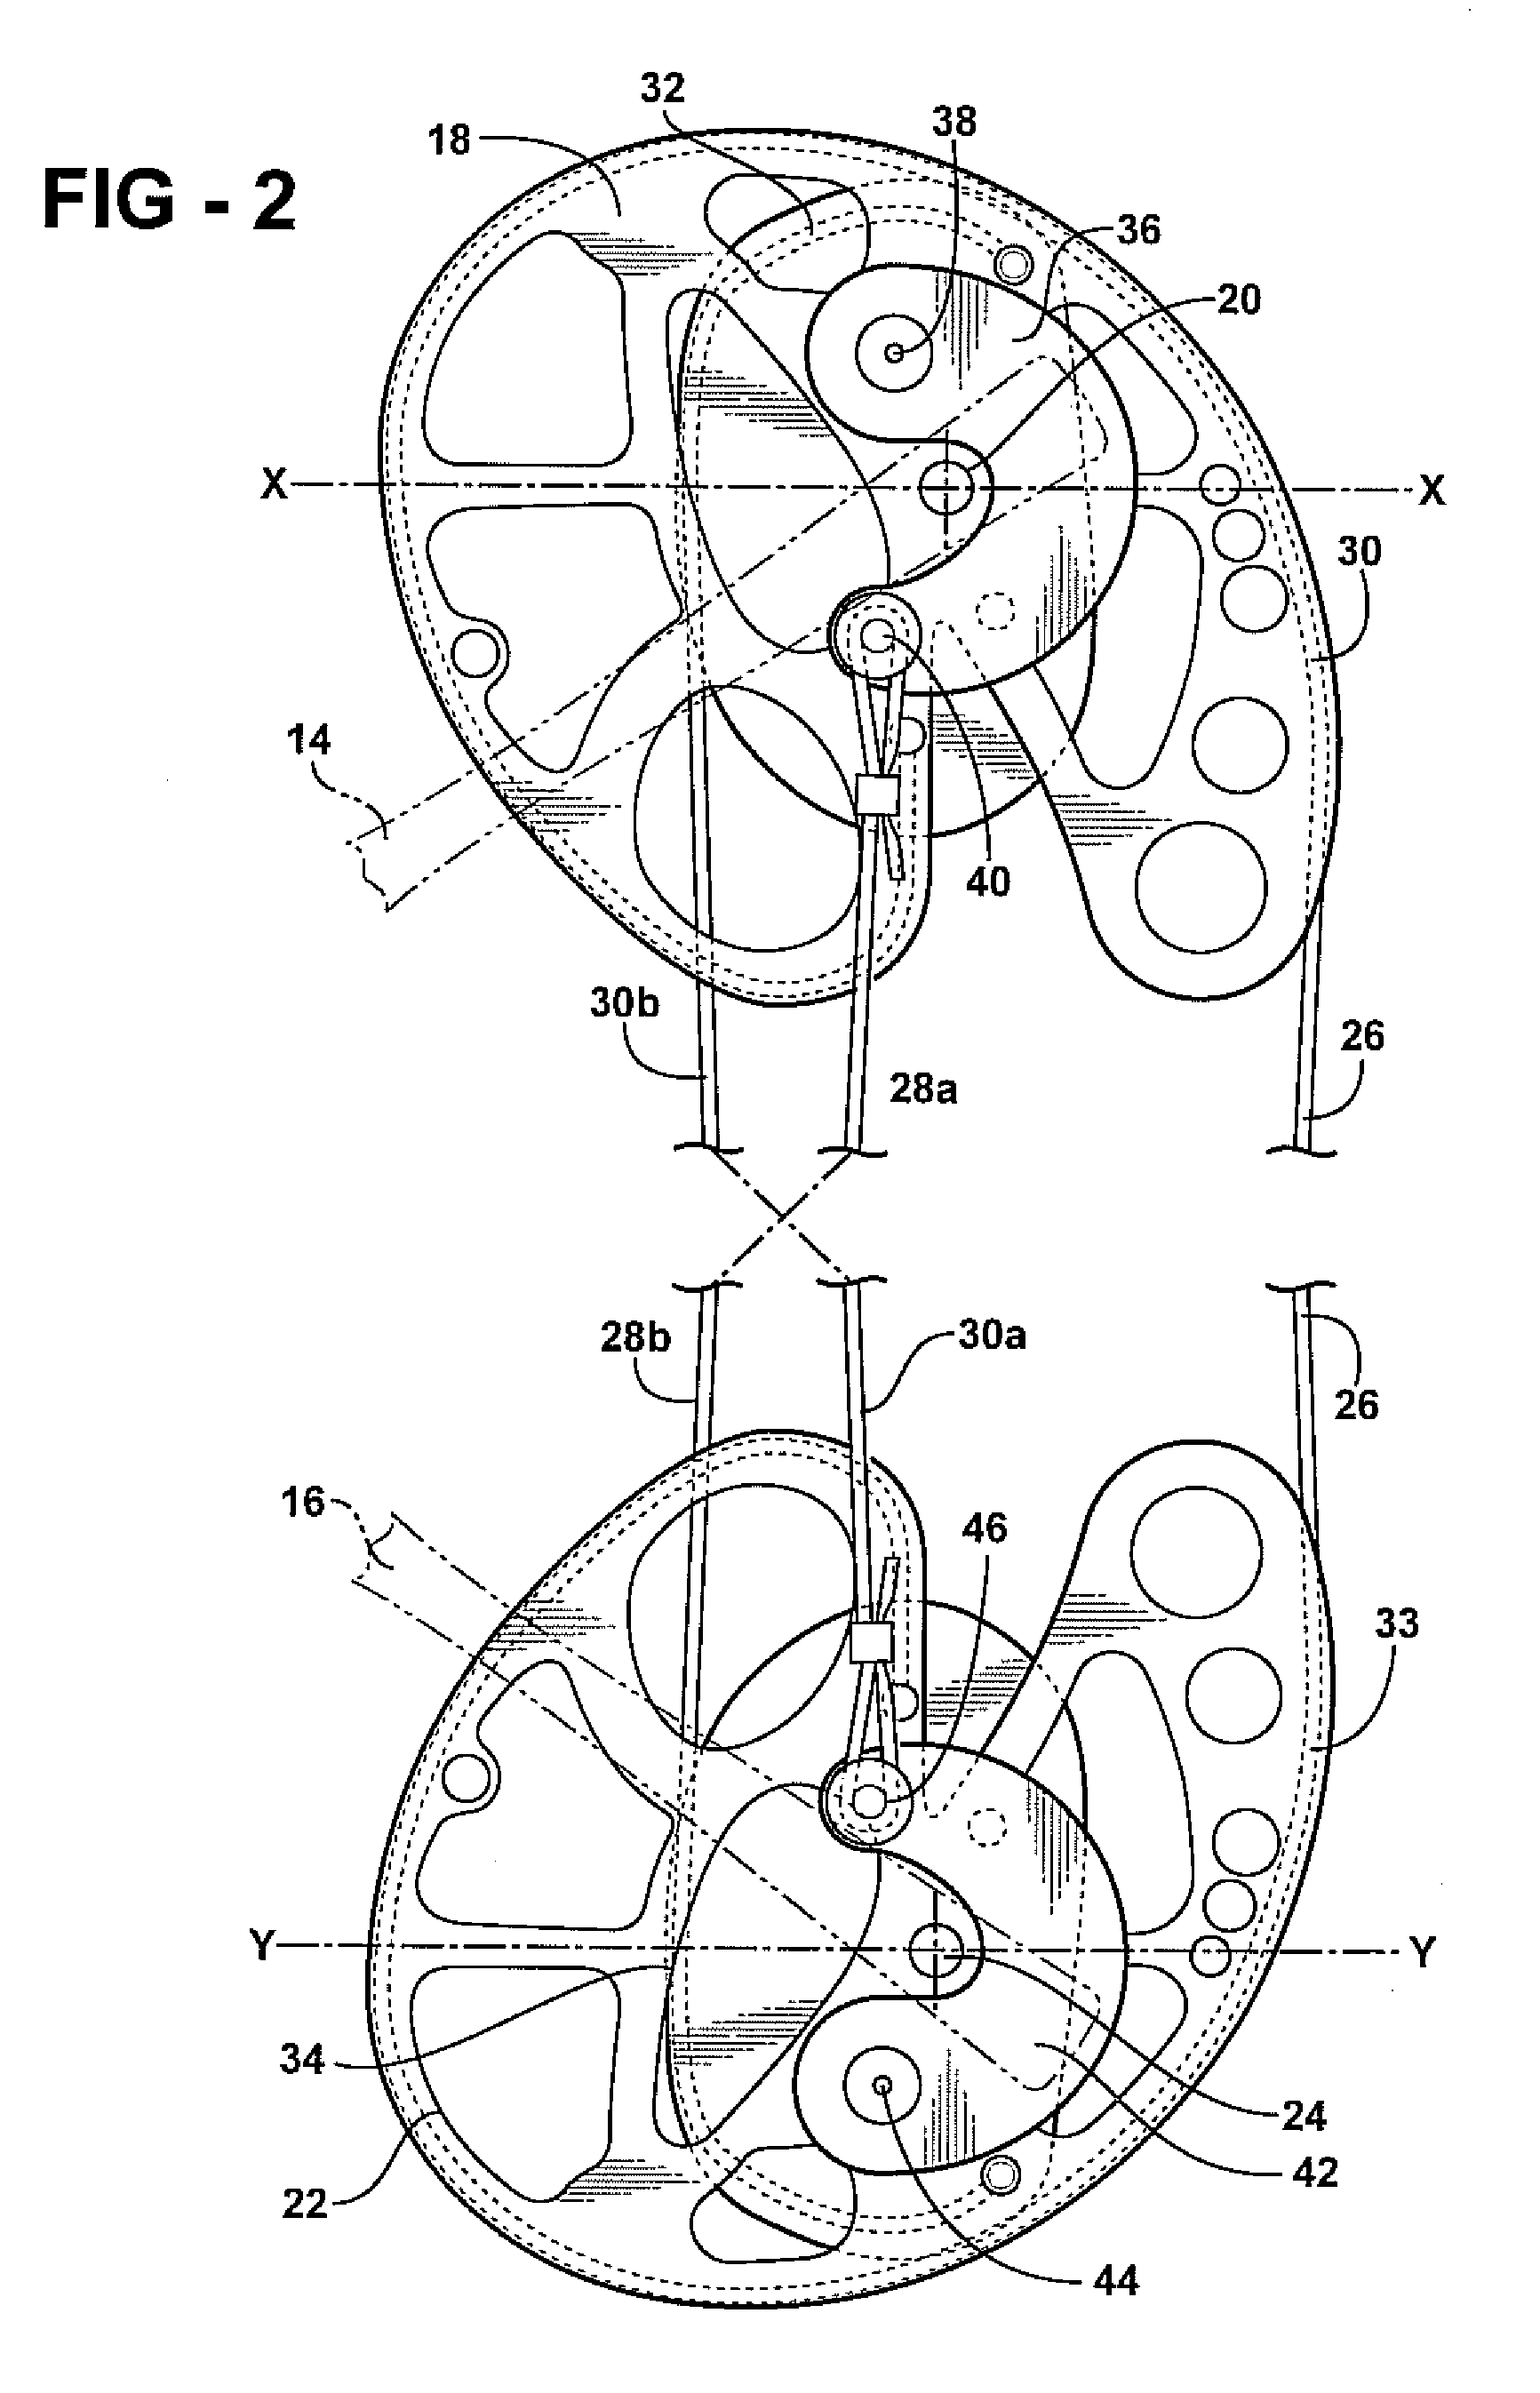 Balanced pulley assembly for compound archery bows, and bows incorporating that assembly